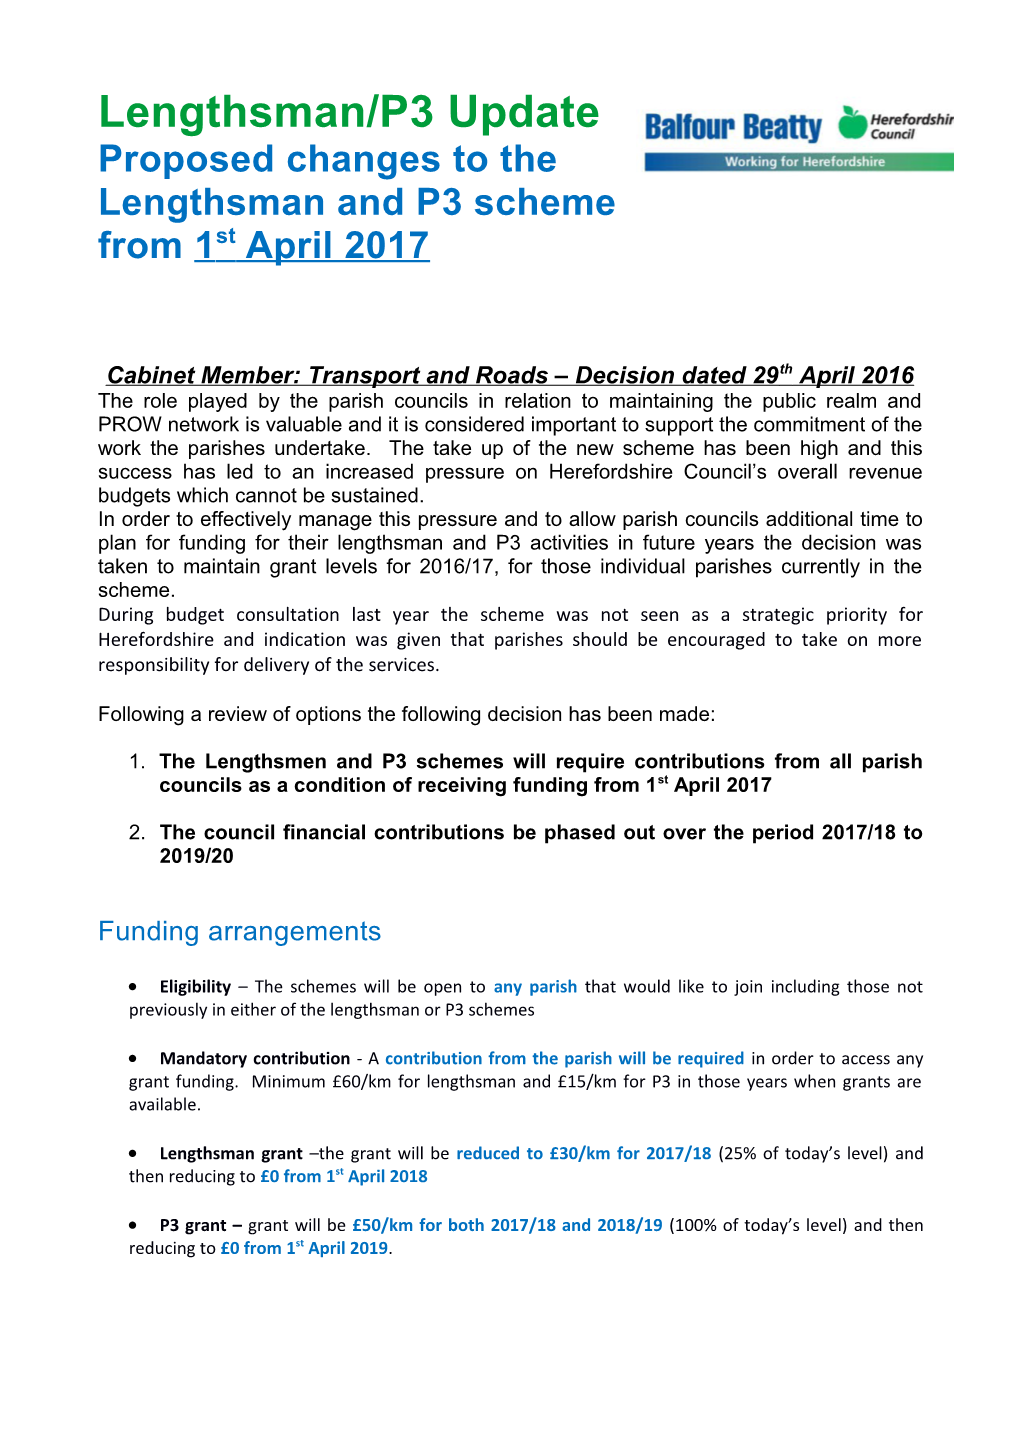 Proposed Changes to the Lengstham and P3 Scheme from 1 April 2017